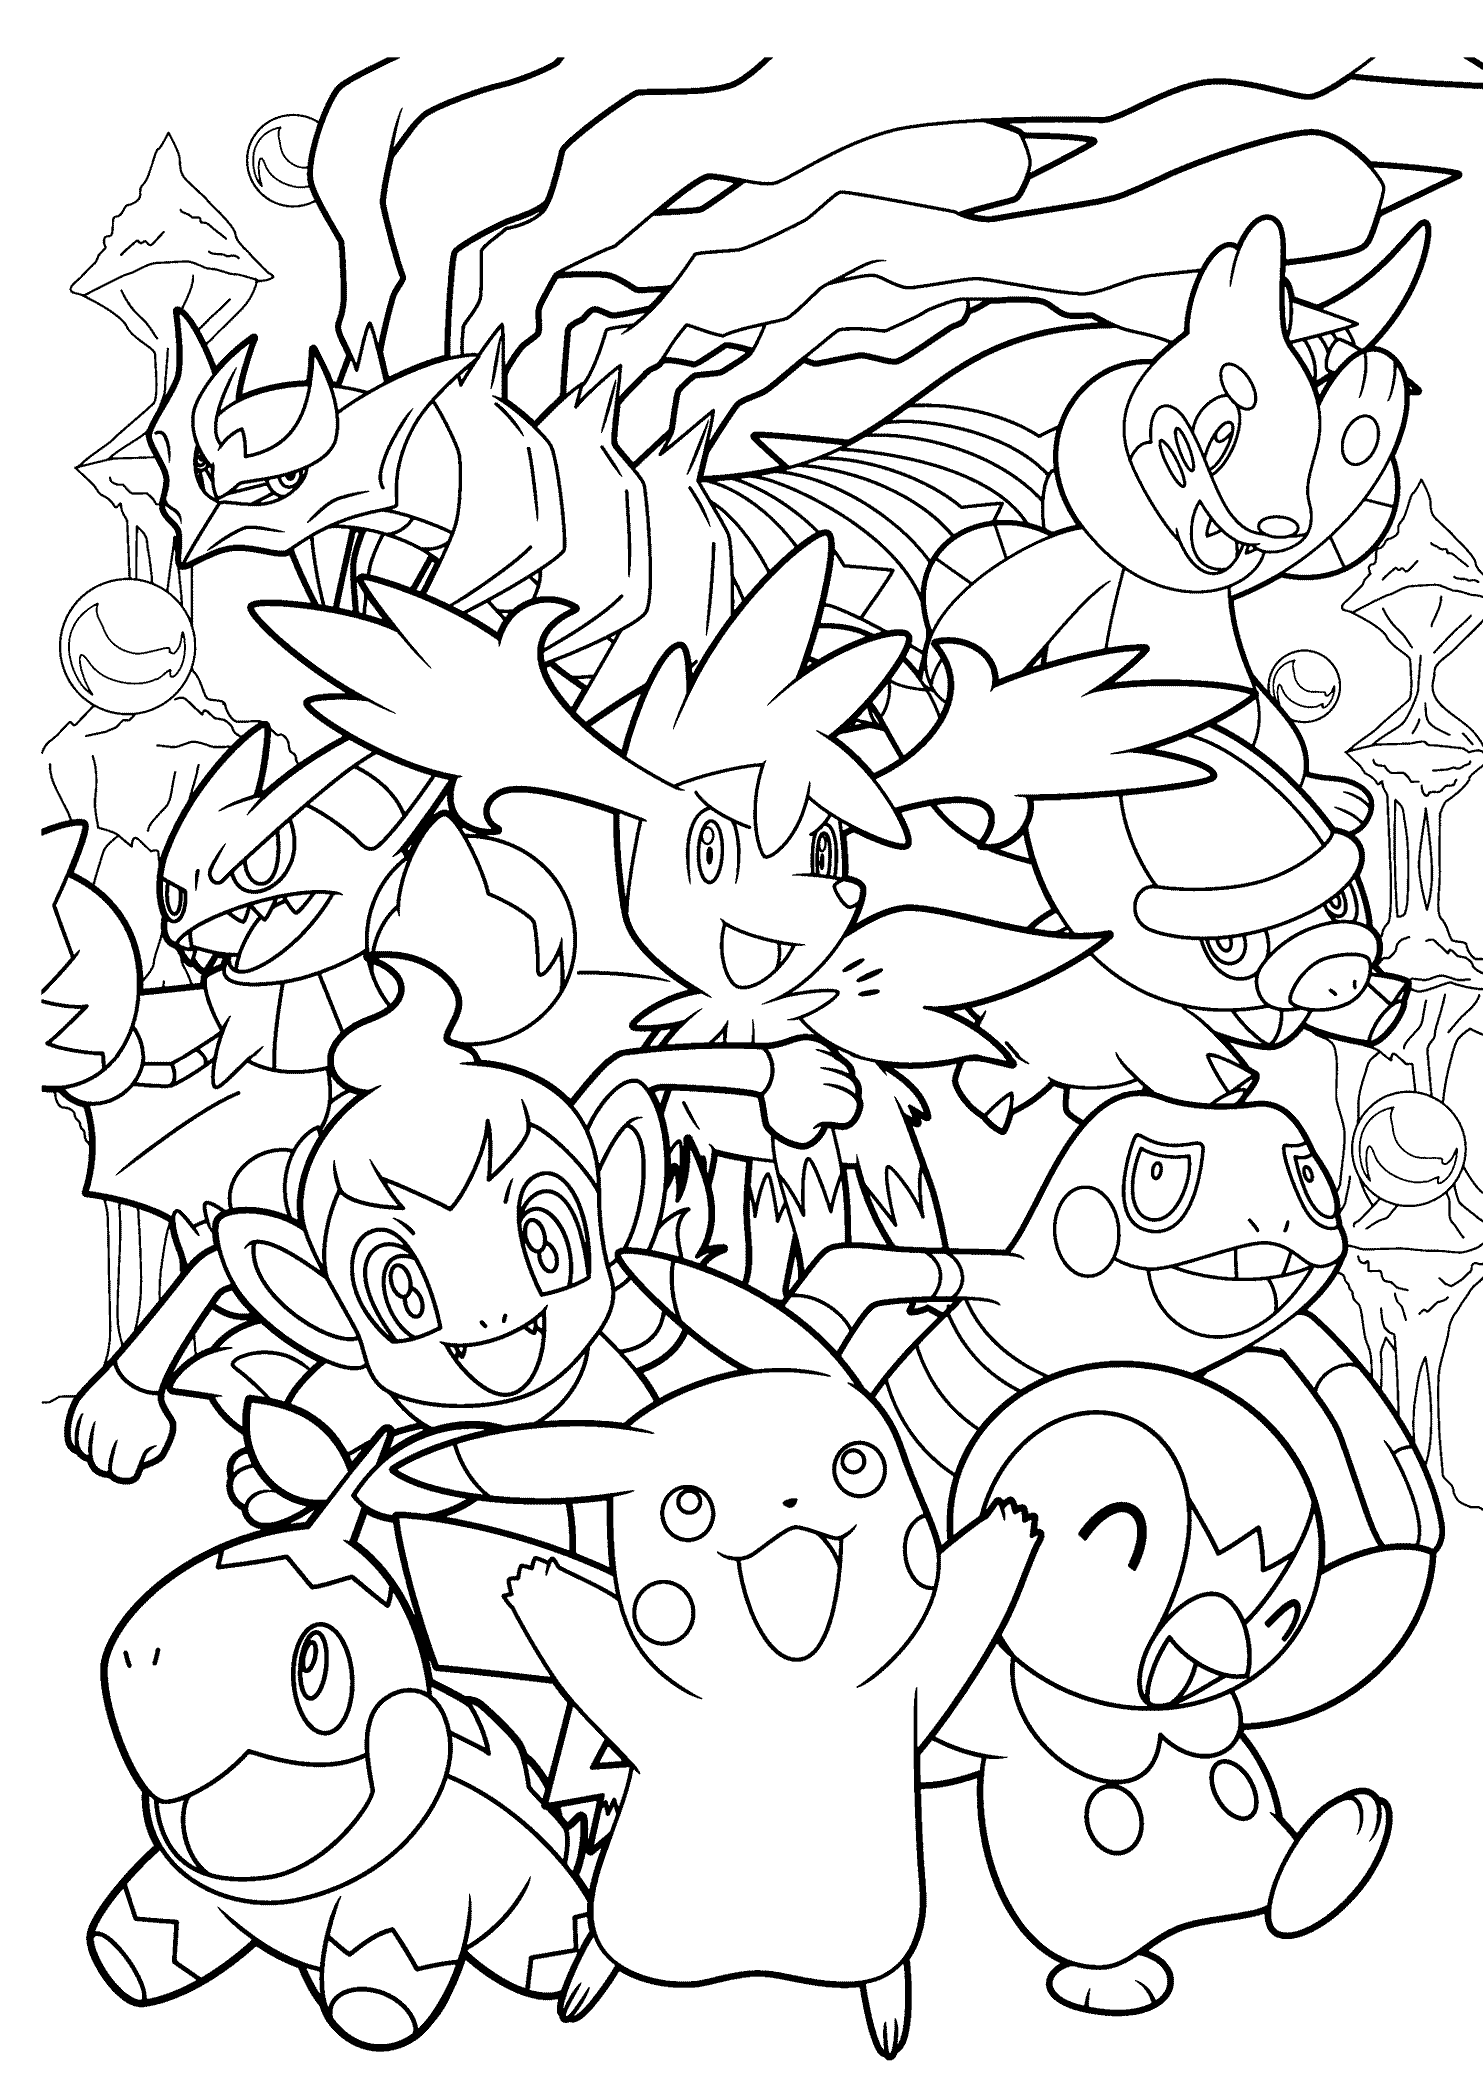 All pokemon anime coloring pages for kids printable free pokemon coloring sheets detailed coloring pages pokemon coloring pages